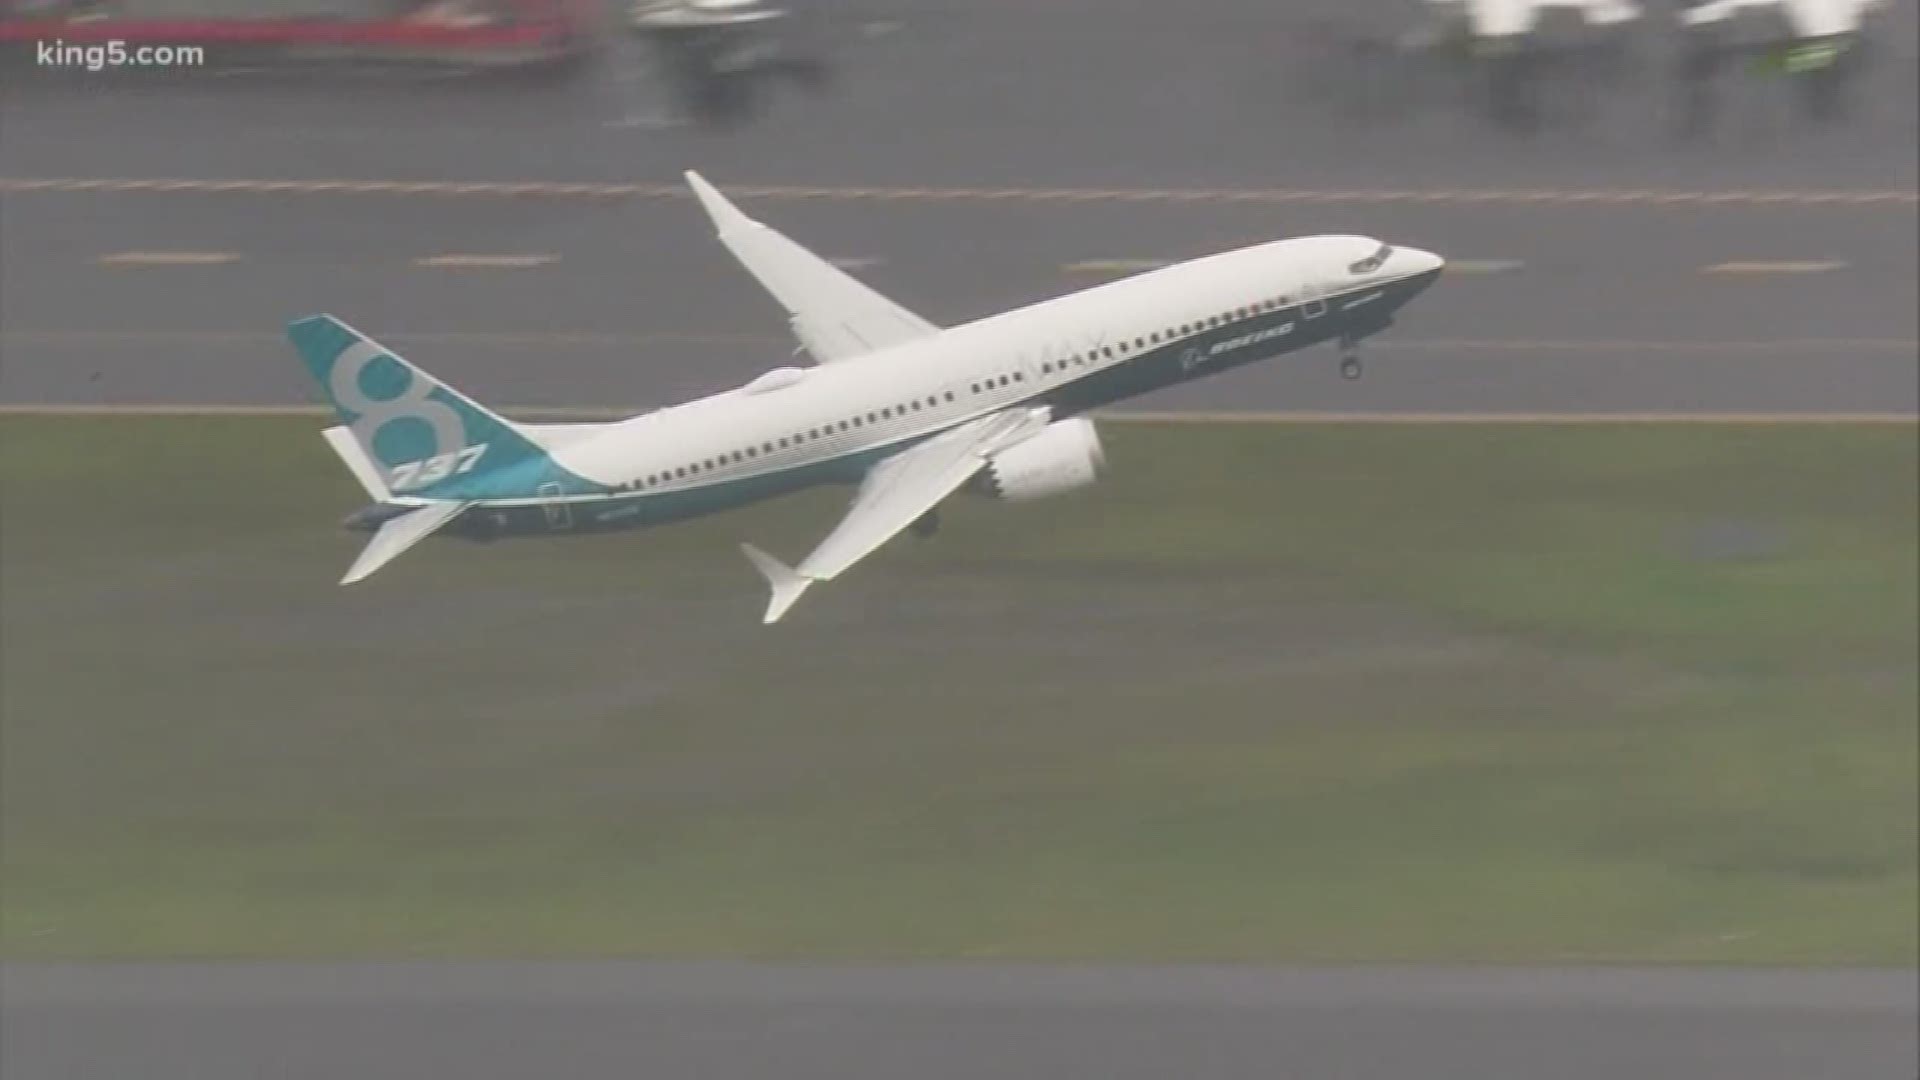 A criminal subpoena could actually hurt the investigation into two recent deadly crashes of Boeing 737 MAX planes. KING 5's Glenn Farley reports.